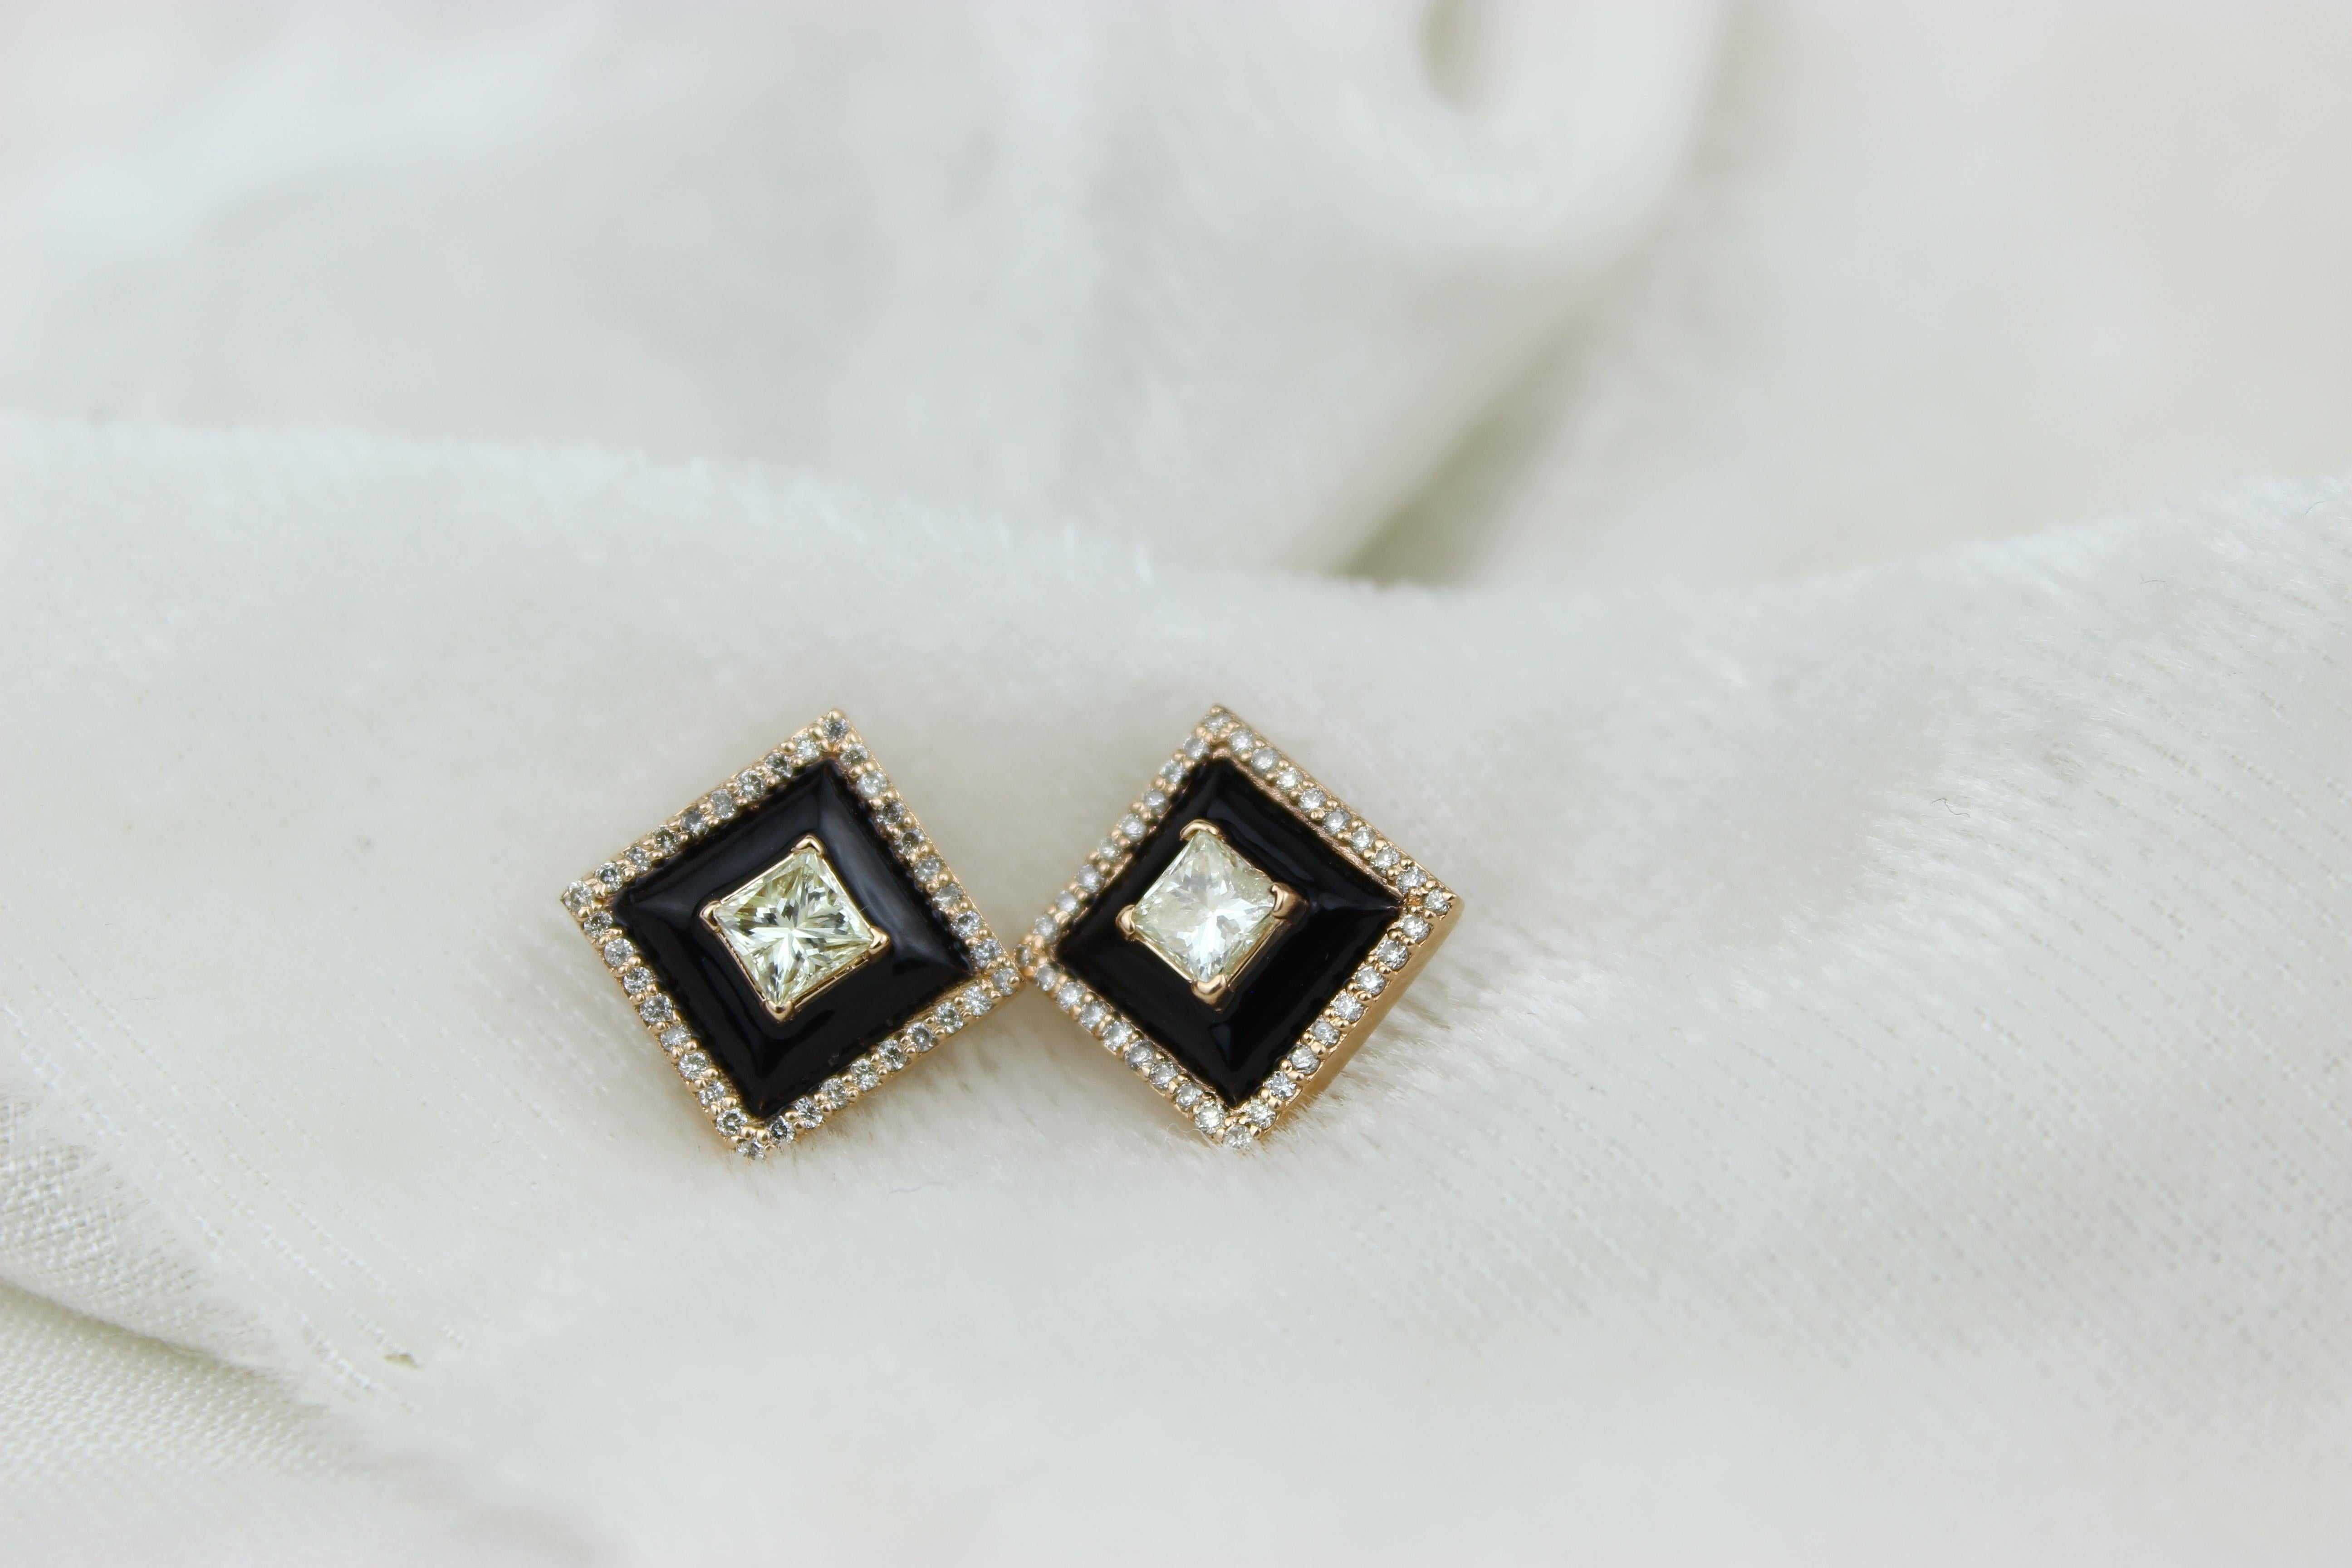 Black Enameled Stud Earrings with Princess Diamonds in 18k Solid Gold In New Condition For Sale In New Delhi, DL